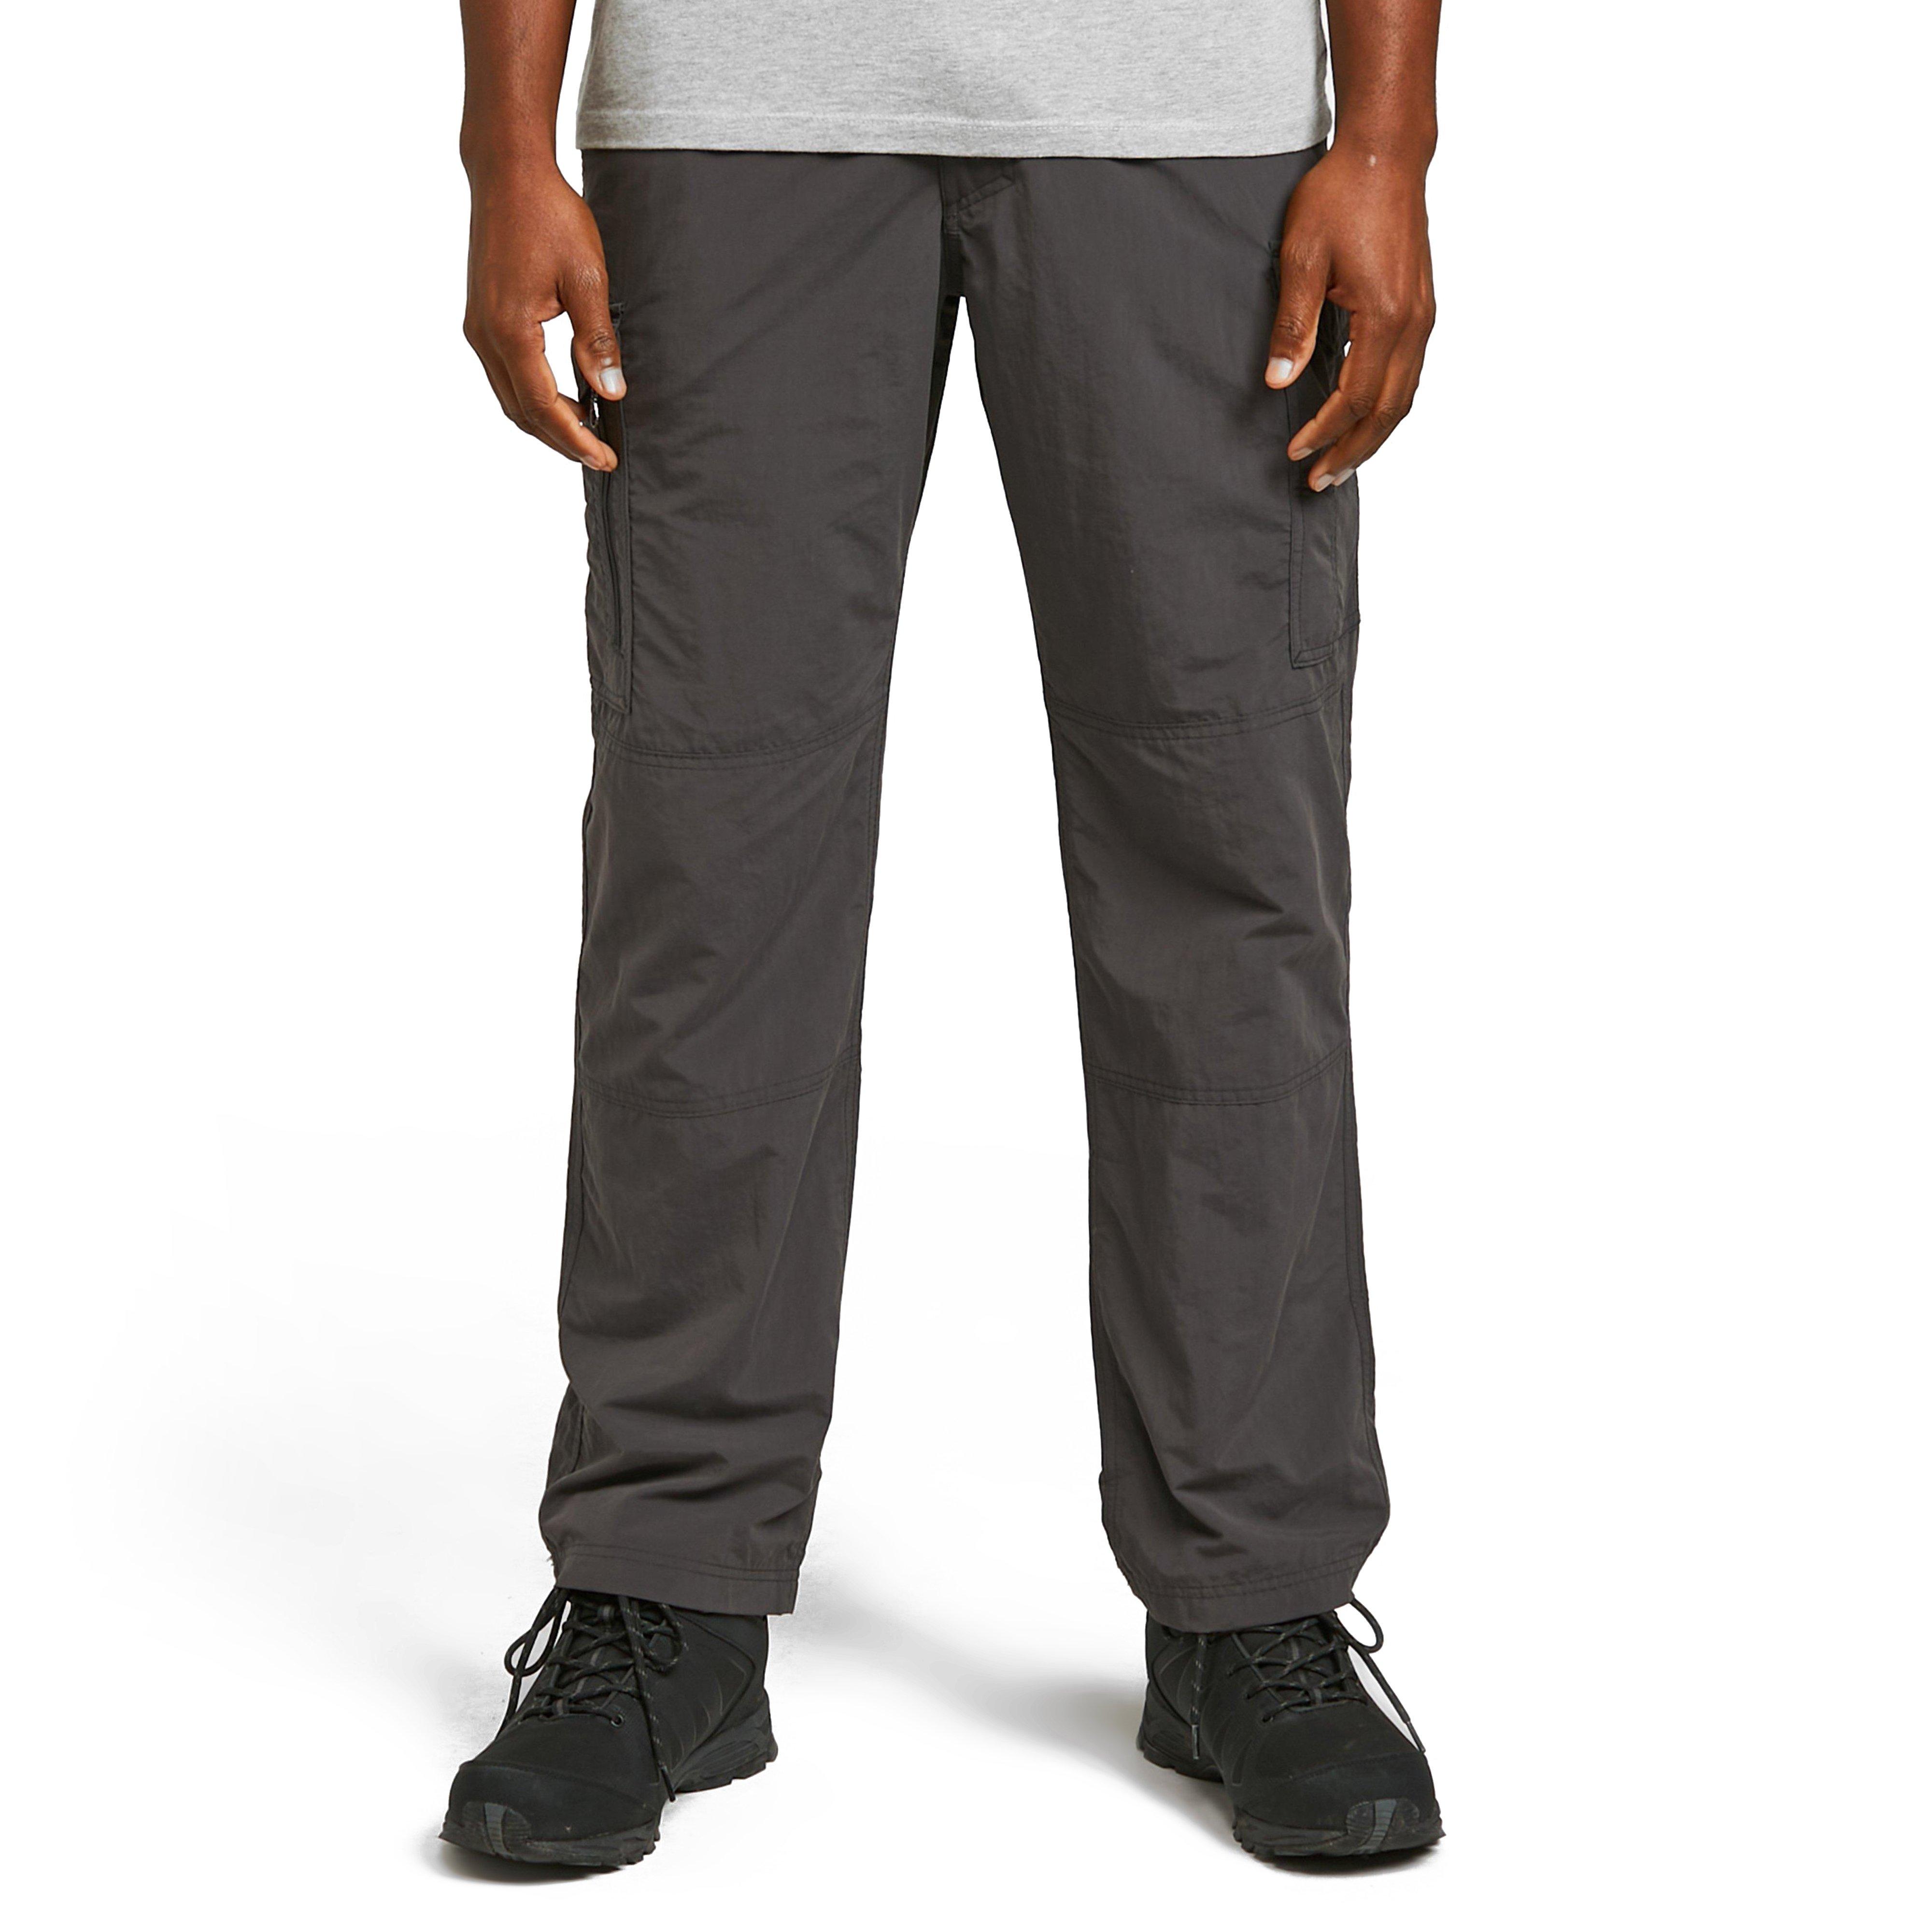 Craghoppers Men's Nosilife Cargo II Trousers Review